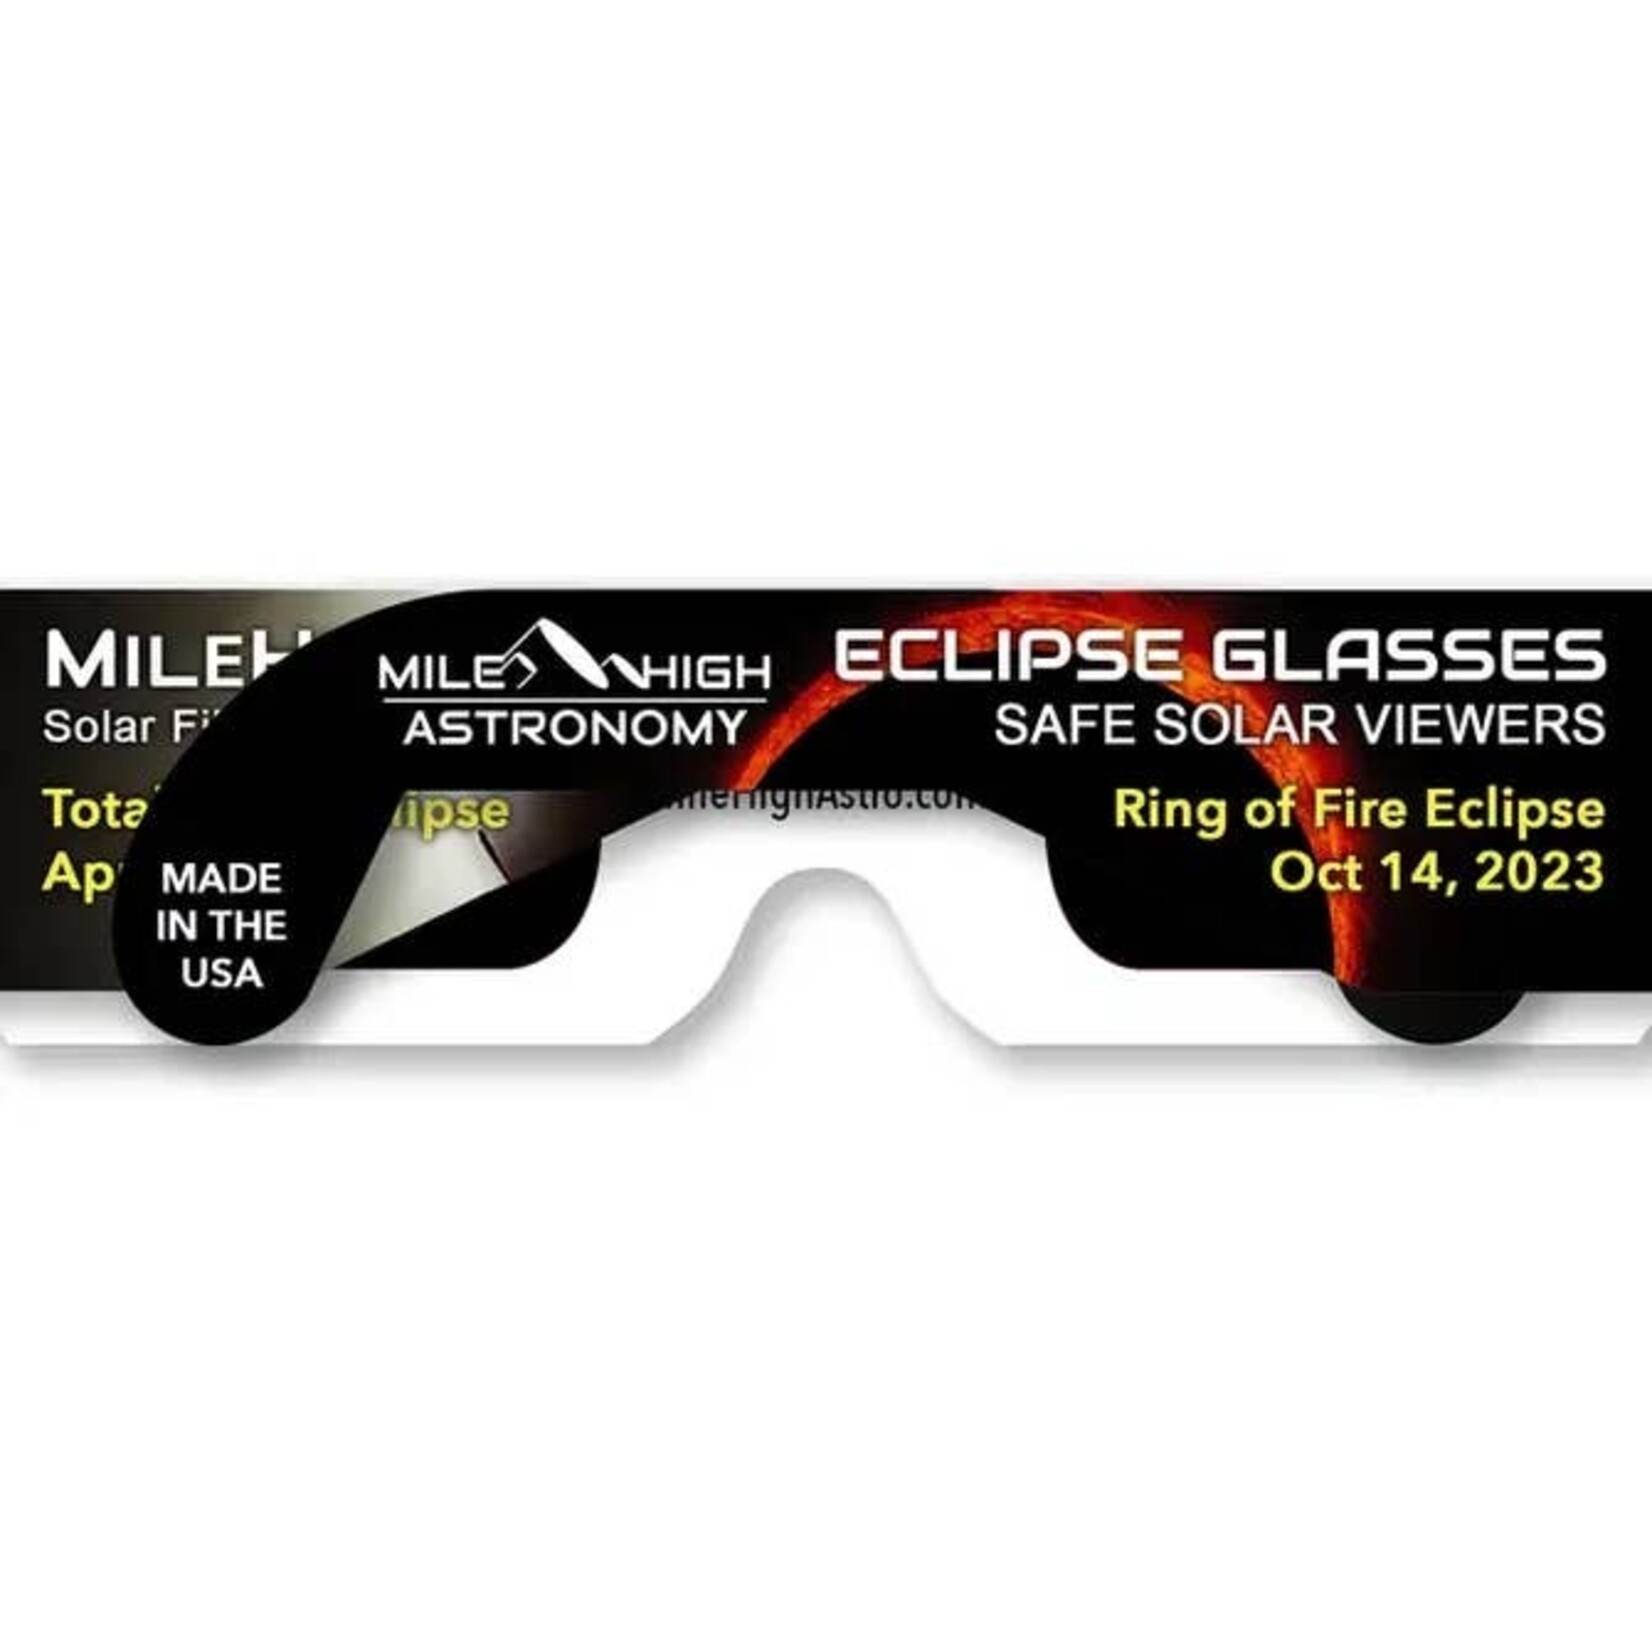 Mile High Astronomy Solar Eclipse Glasses - 10 Pack